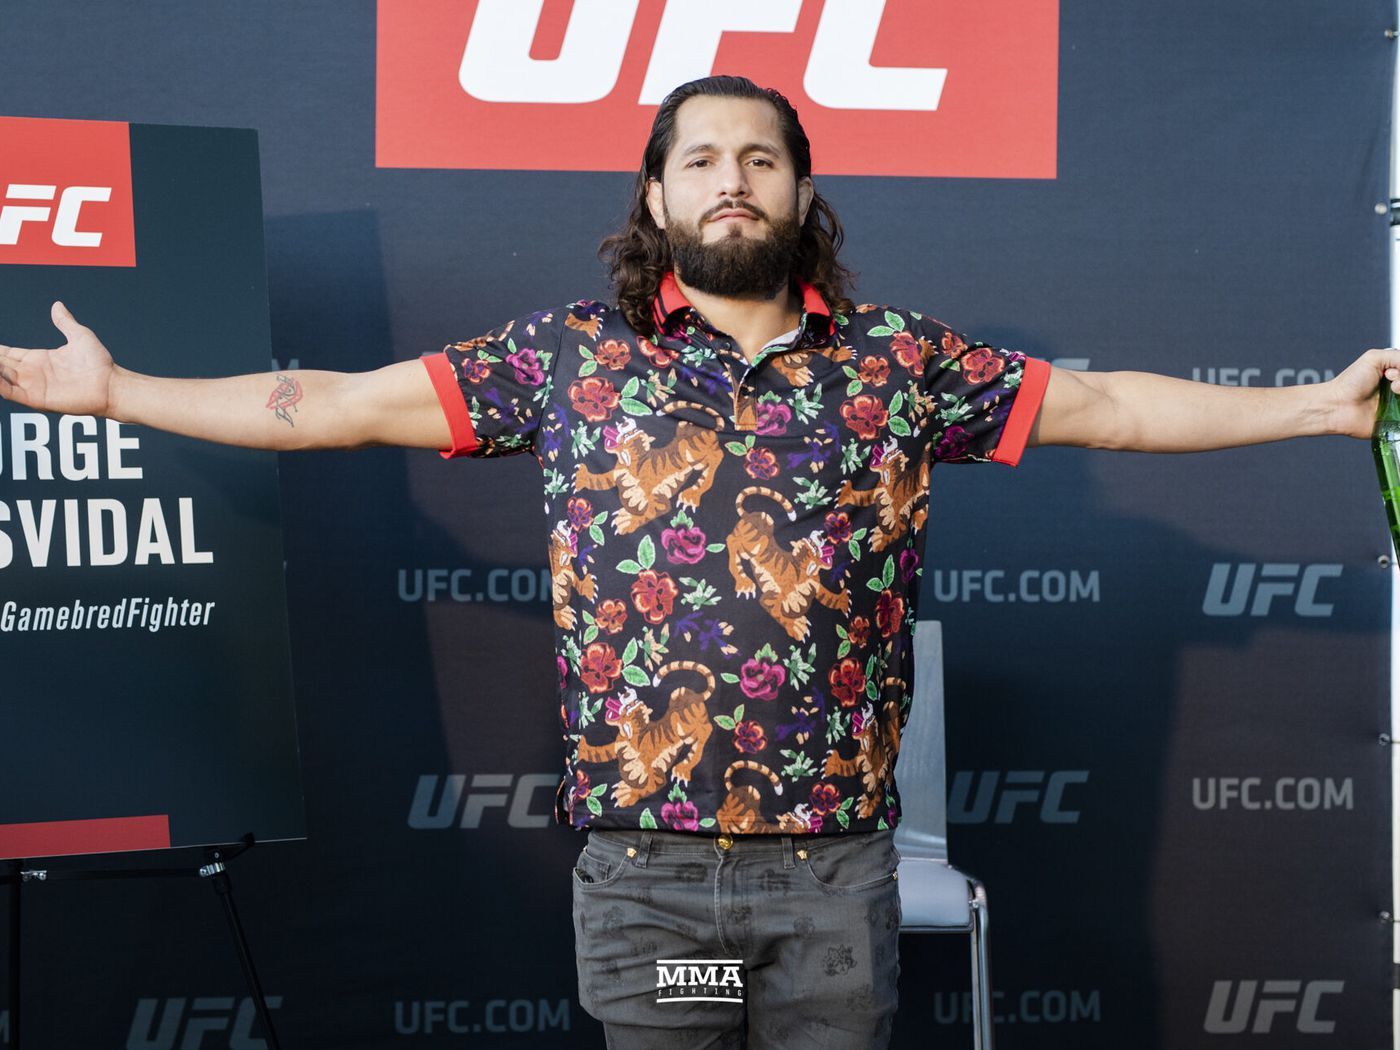 Morning Report: Jorge Masvidal reacts to Colby Covington's